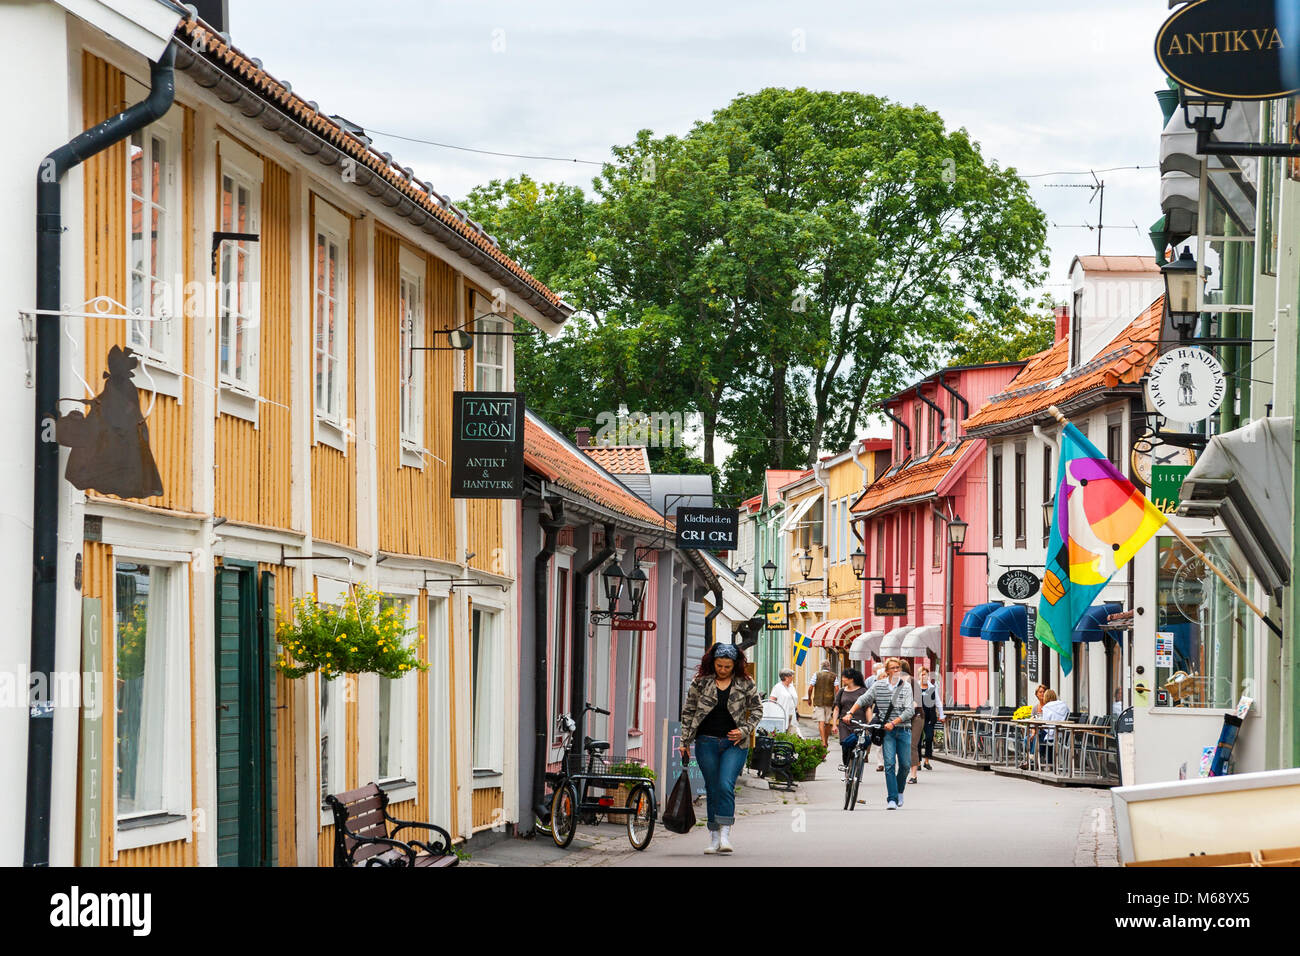 Traditional wooden houses on Stora Gatan street in heart of old town. Sigtuna, Sweden Stock Photo